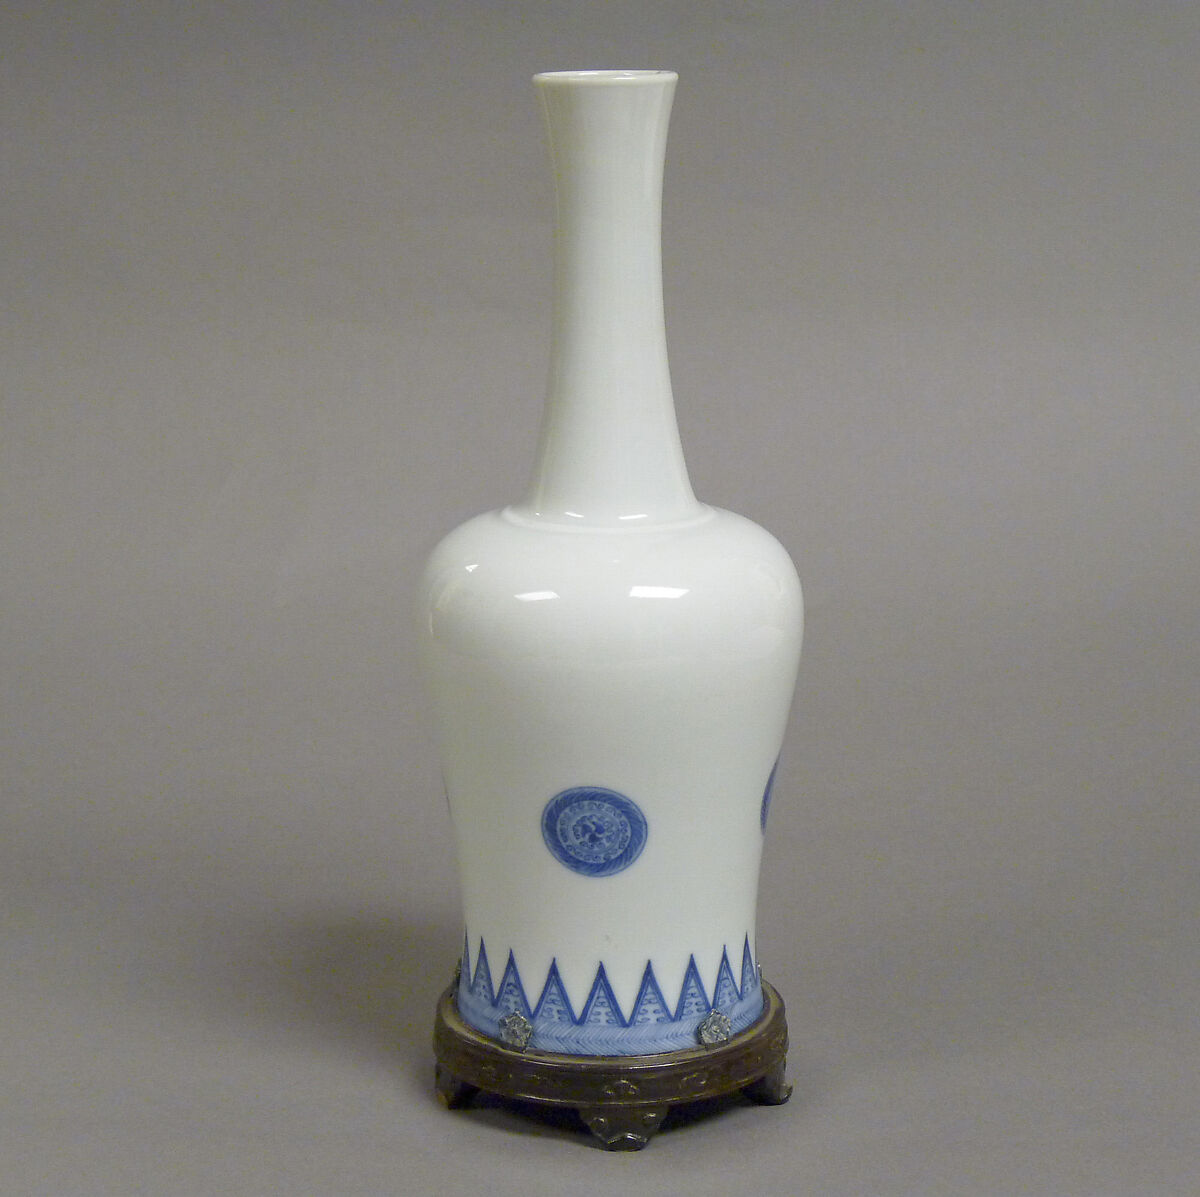 Bottle (one of a pair), Porcelain painted in underglaze blue, China 